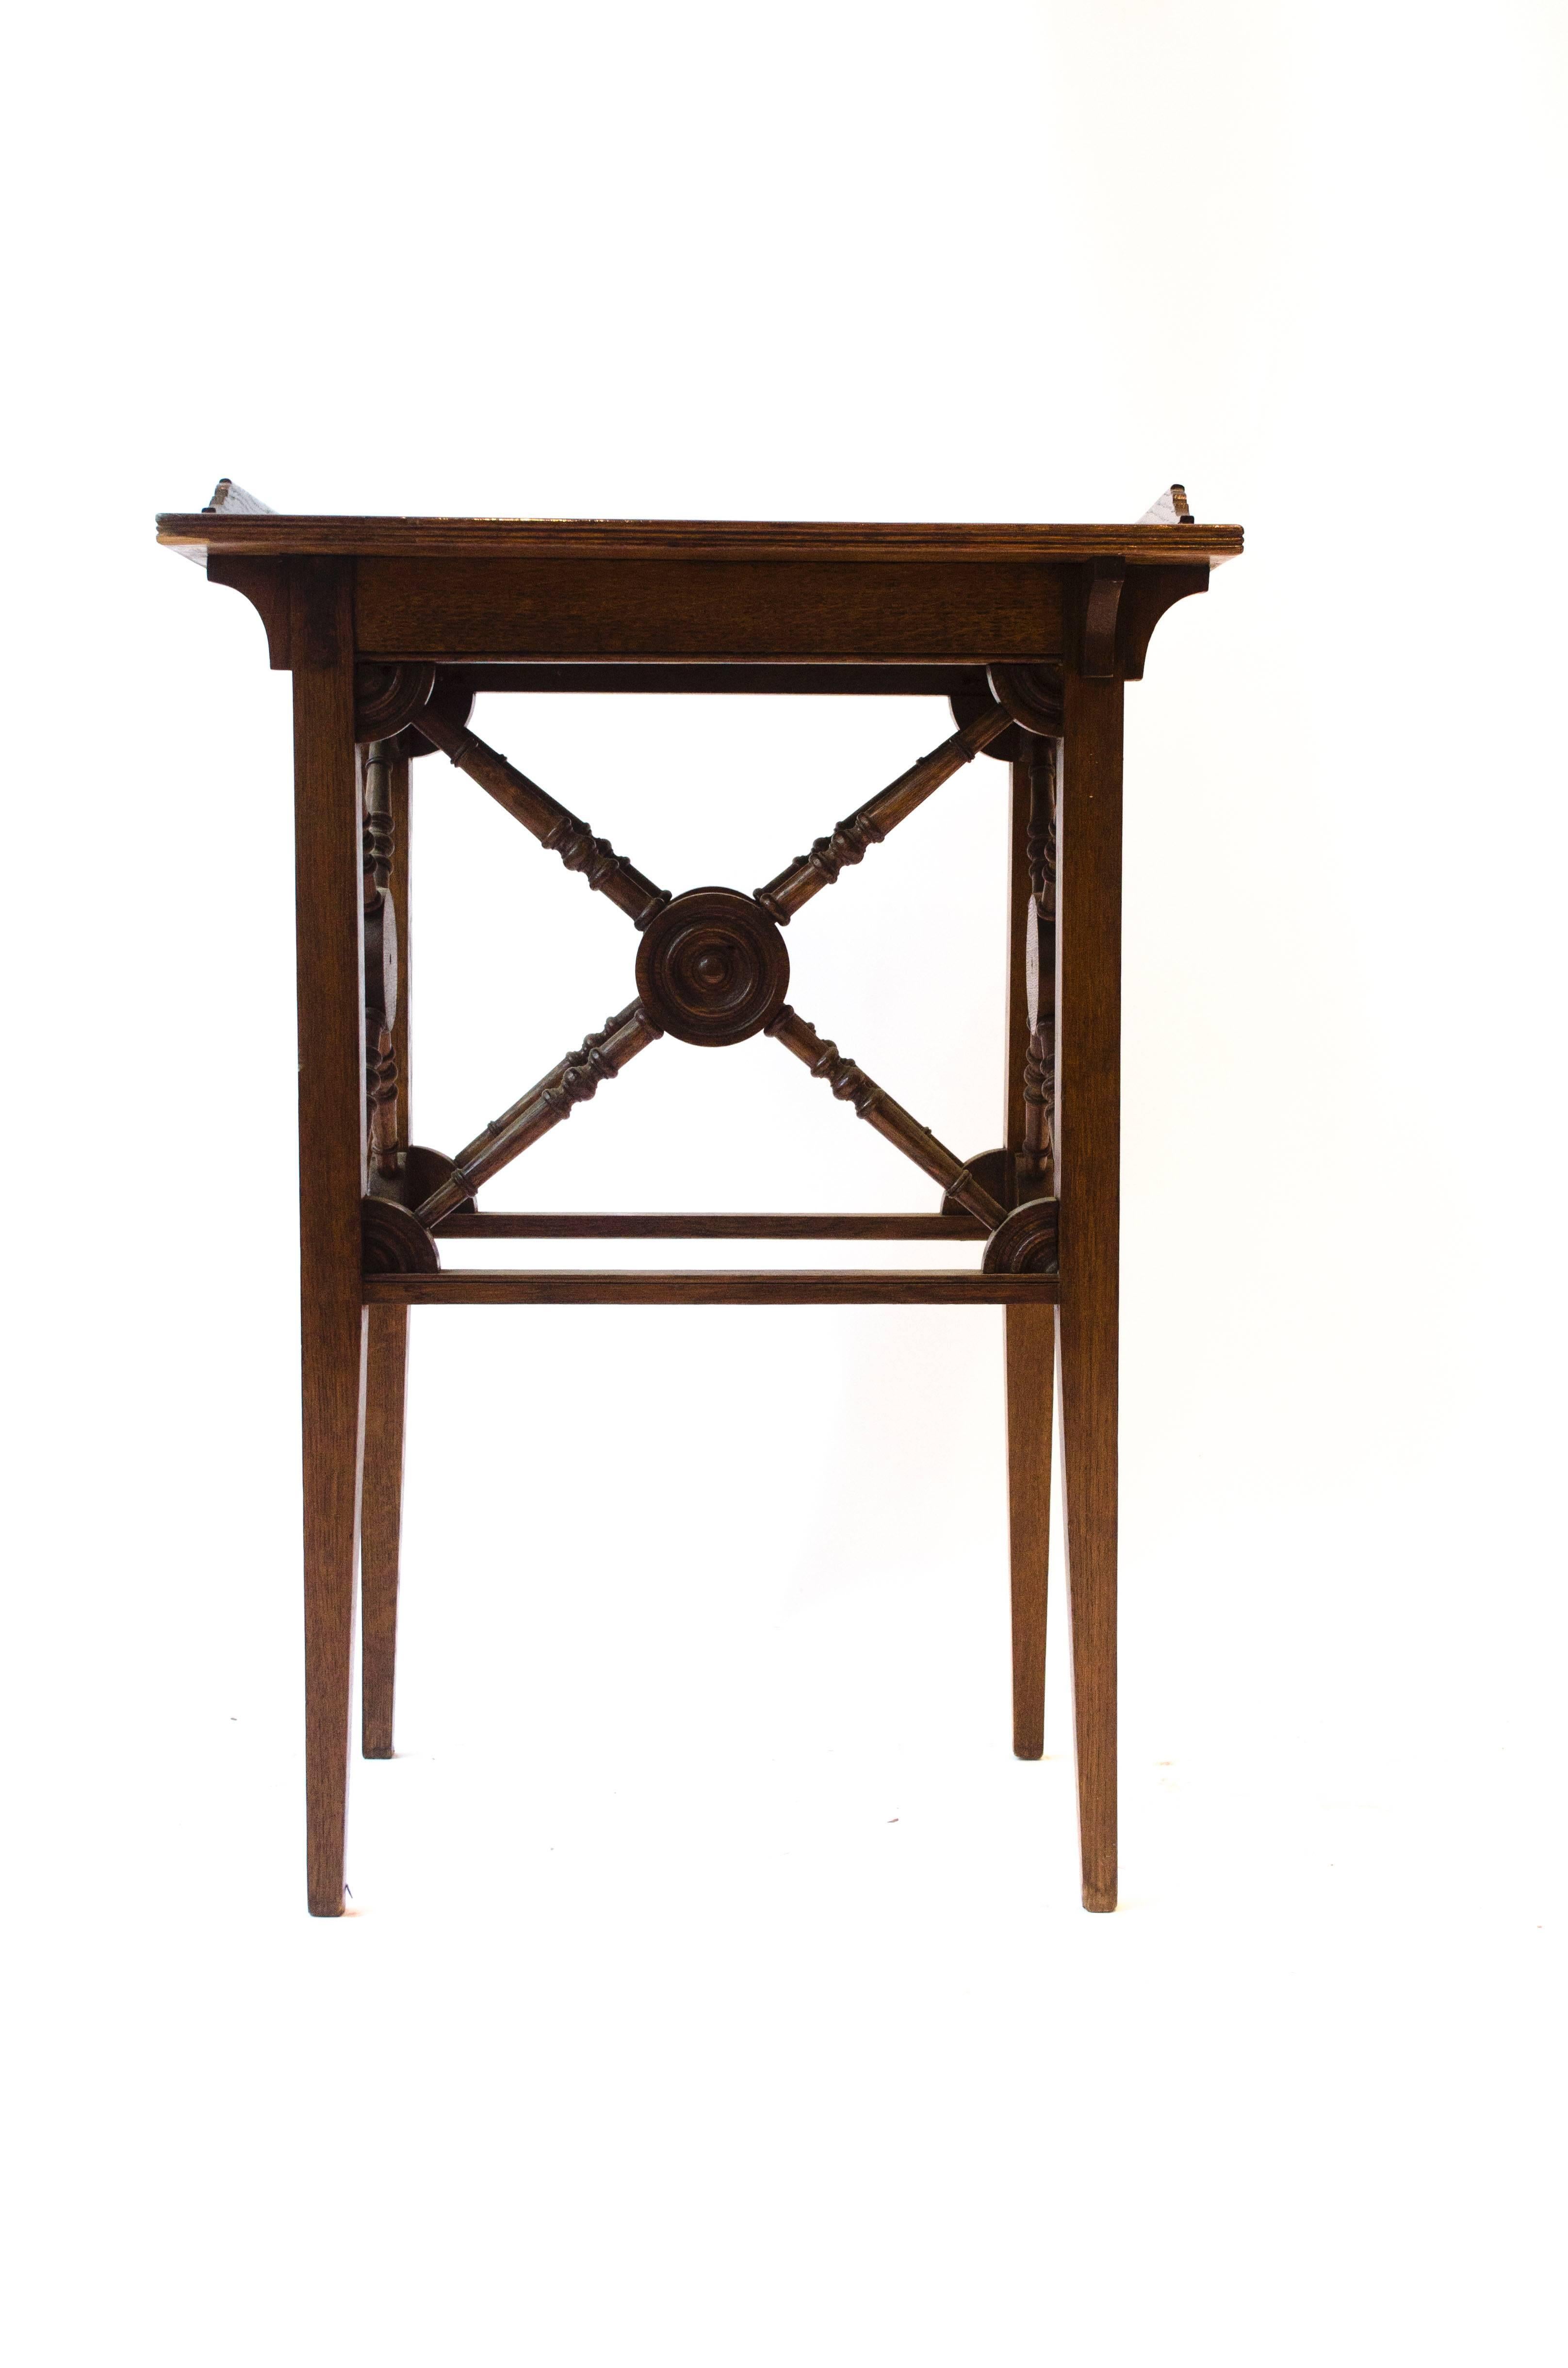 Jas Shoolbred. 
An Aesthetic Movement oak side table with a raised gallery to the top and a circular disc and turned cross stretcher details to each side with quartered circles to each corner.
Stamped Jas Shoolbred & Co.